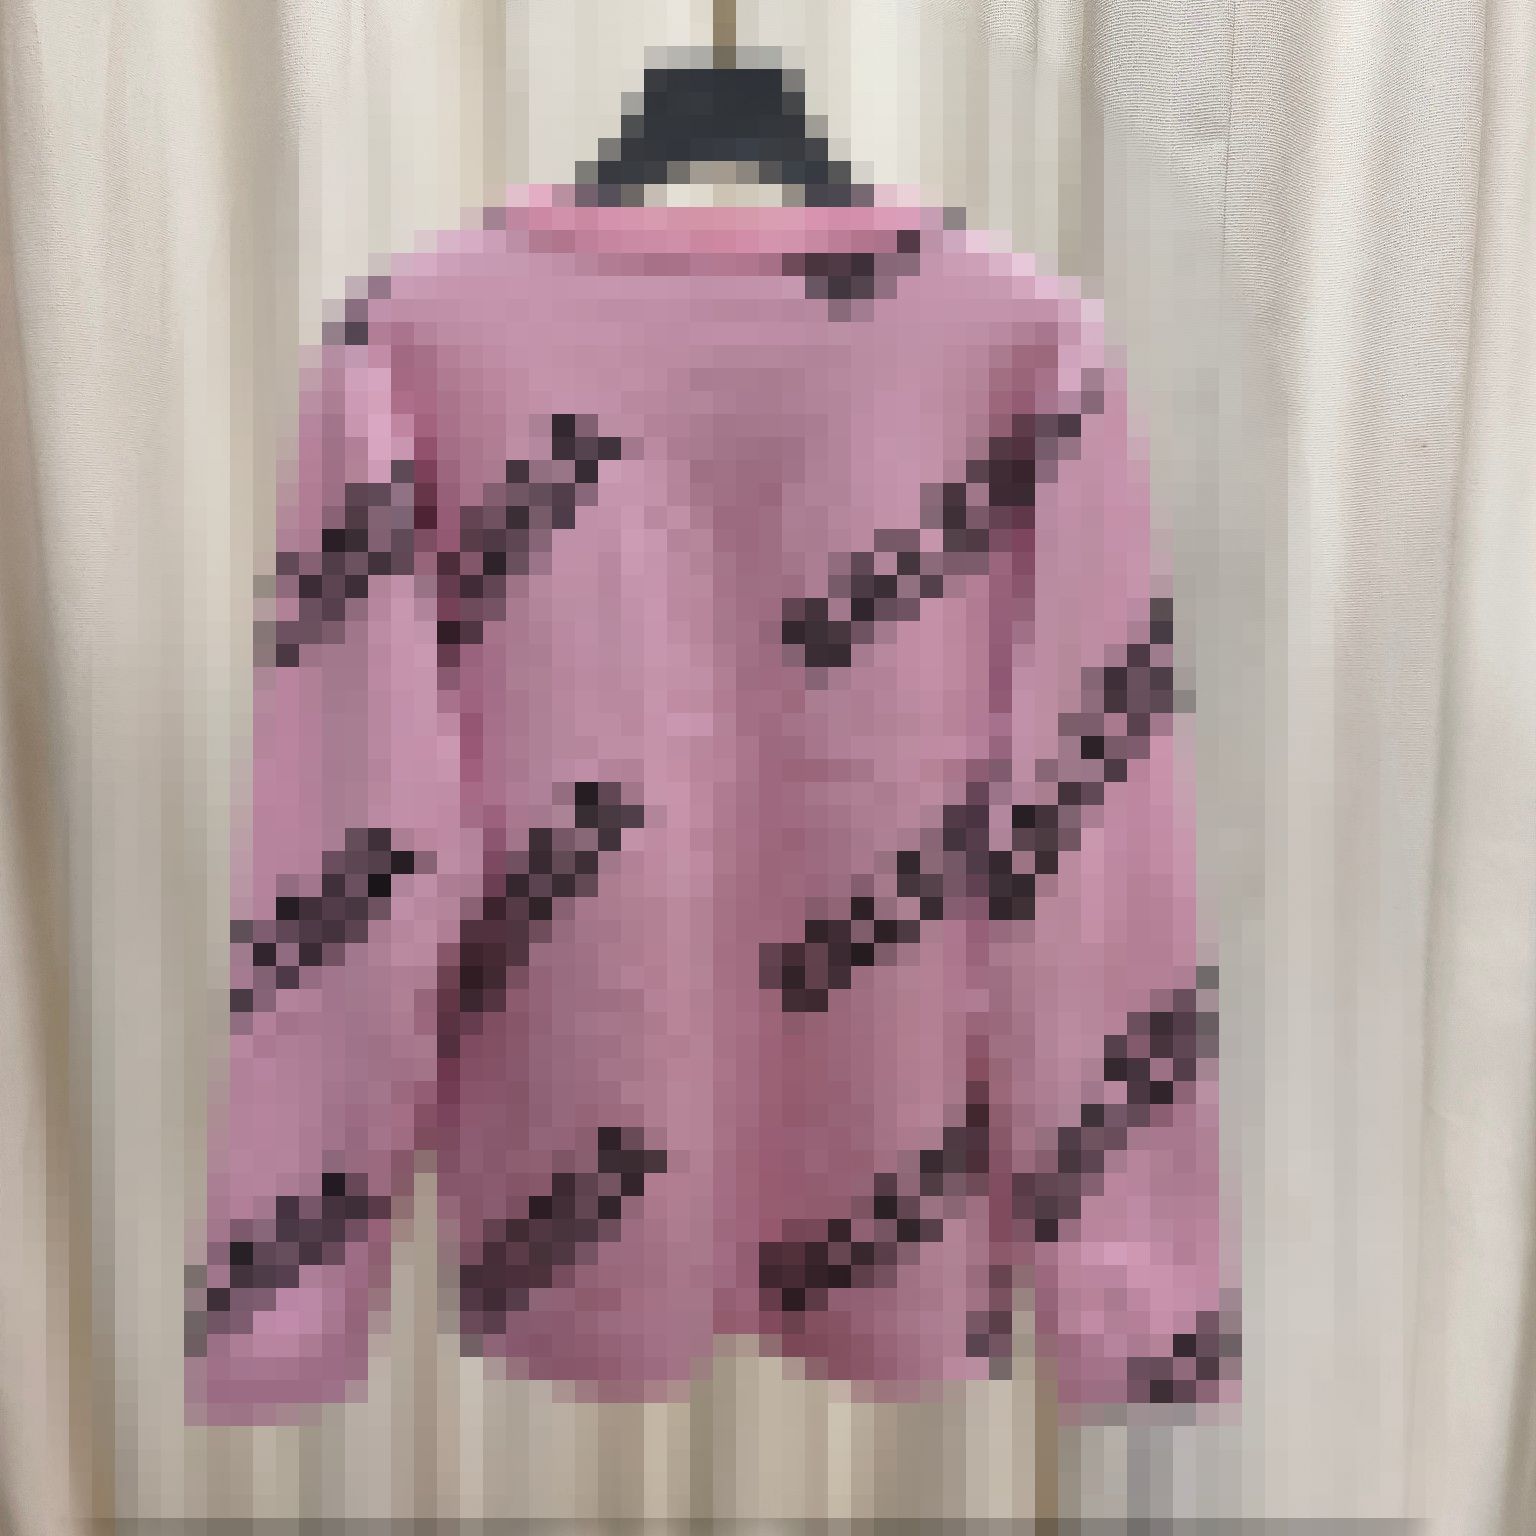 2023 Pink/White/Orange Letter Print Women's Pullover Brand Same Style Women's Sweaters DH180